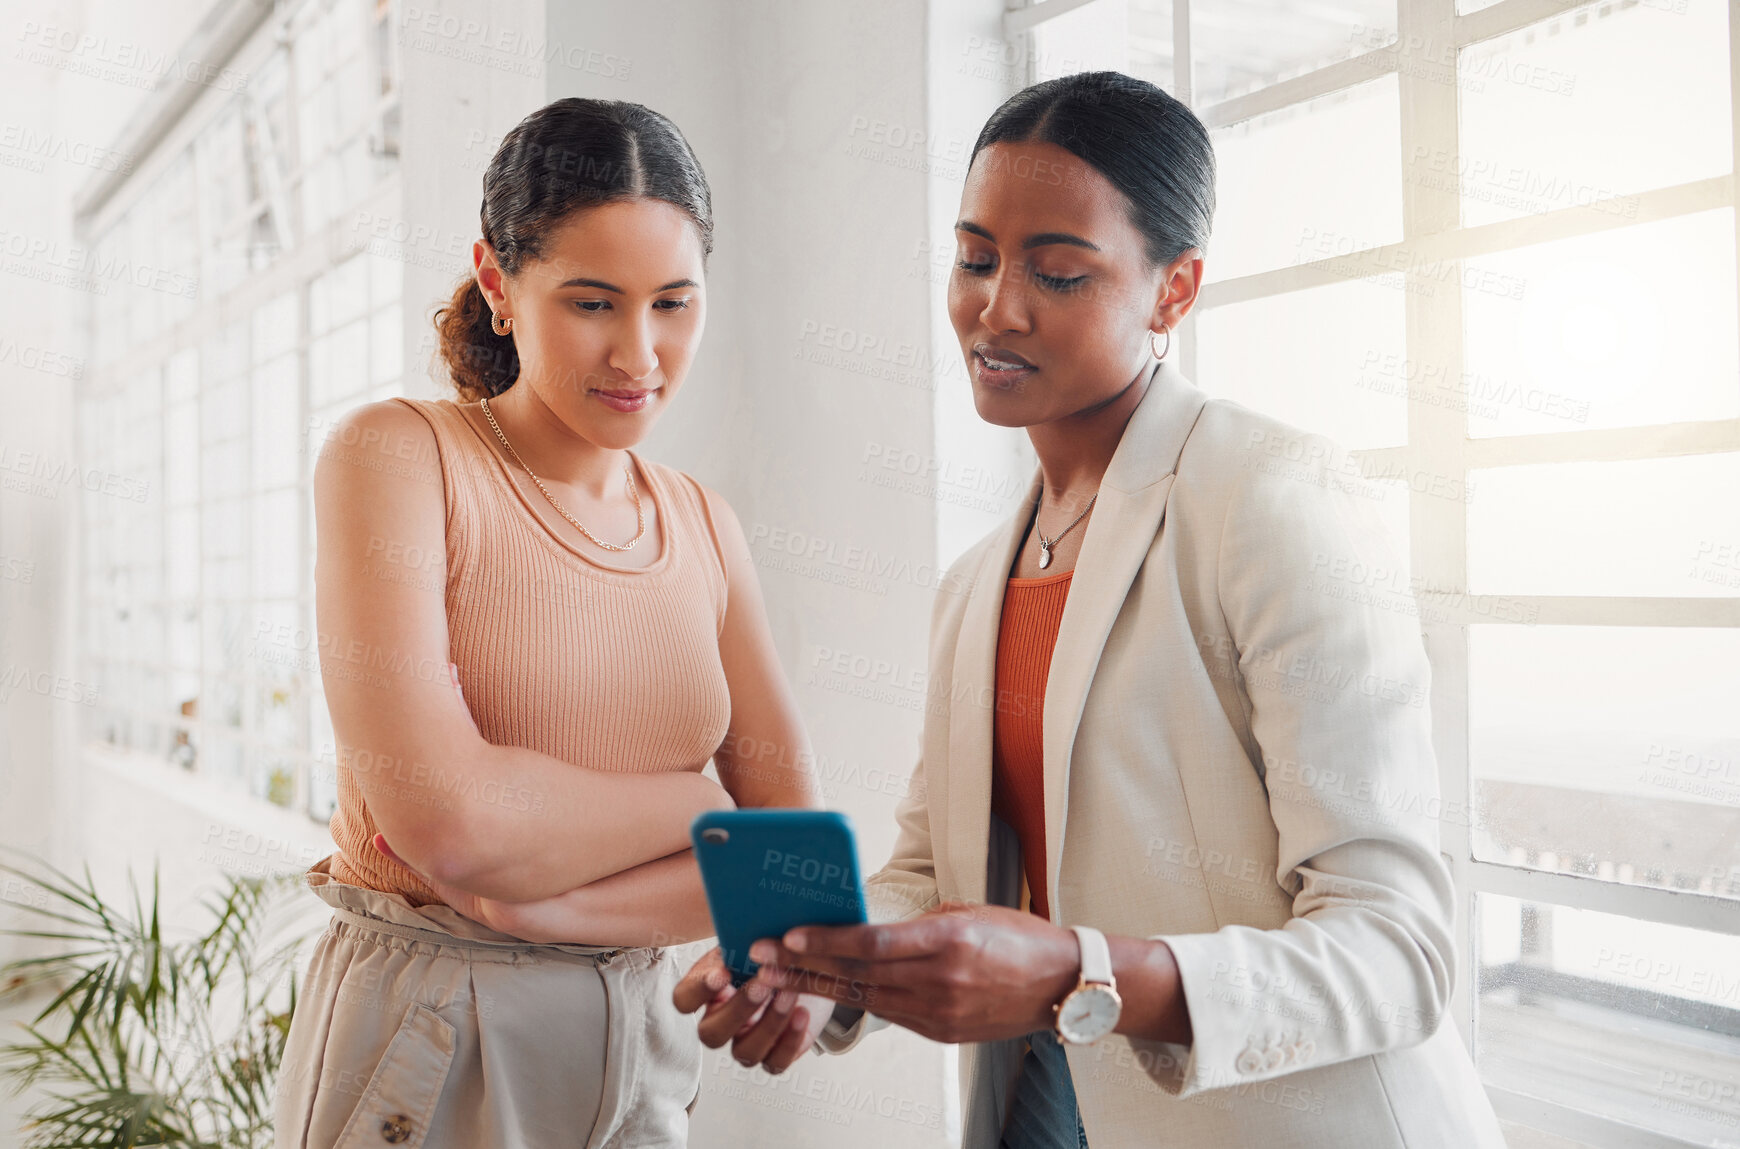 Buy stock photo Two young happy mixed race businesswomen using a phone together at work. Hispanic businessperson talking while showing a female colleague her cellphone in an office